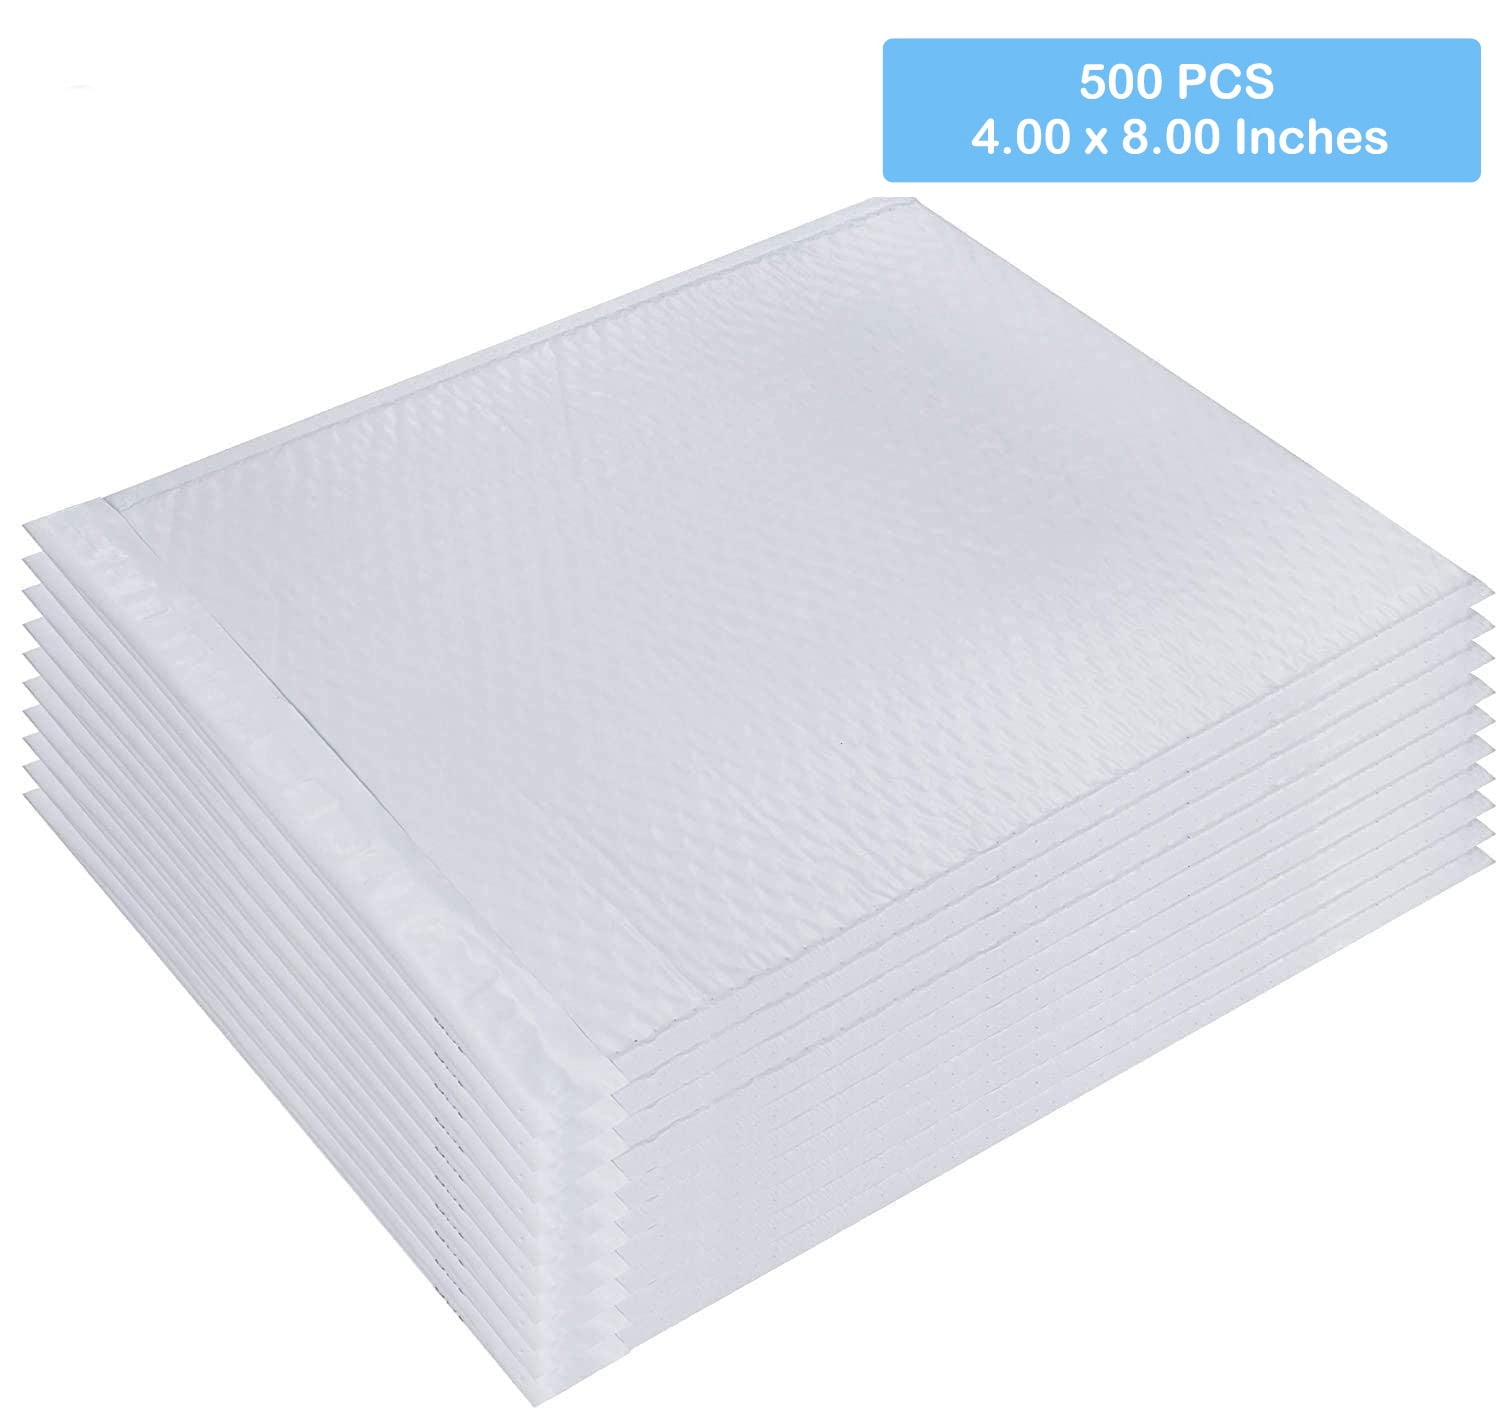 2000 #000 4x8 Poly Bubble Mailers Padded Envelope Shipping Supply Bags 4" x 8" 